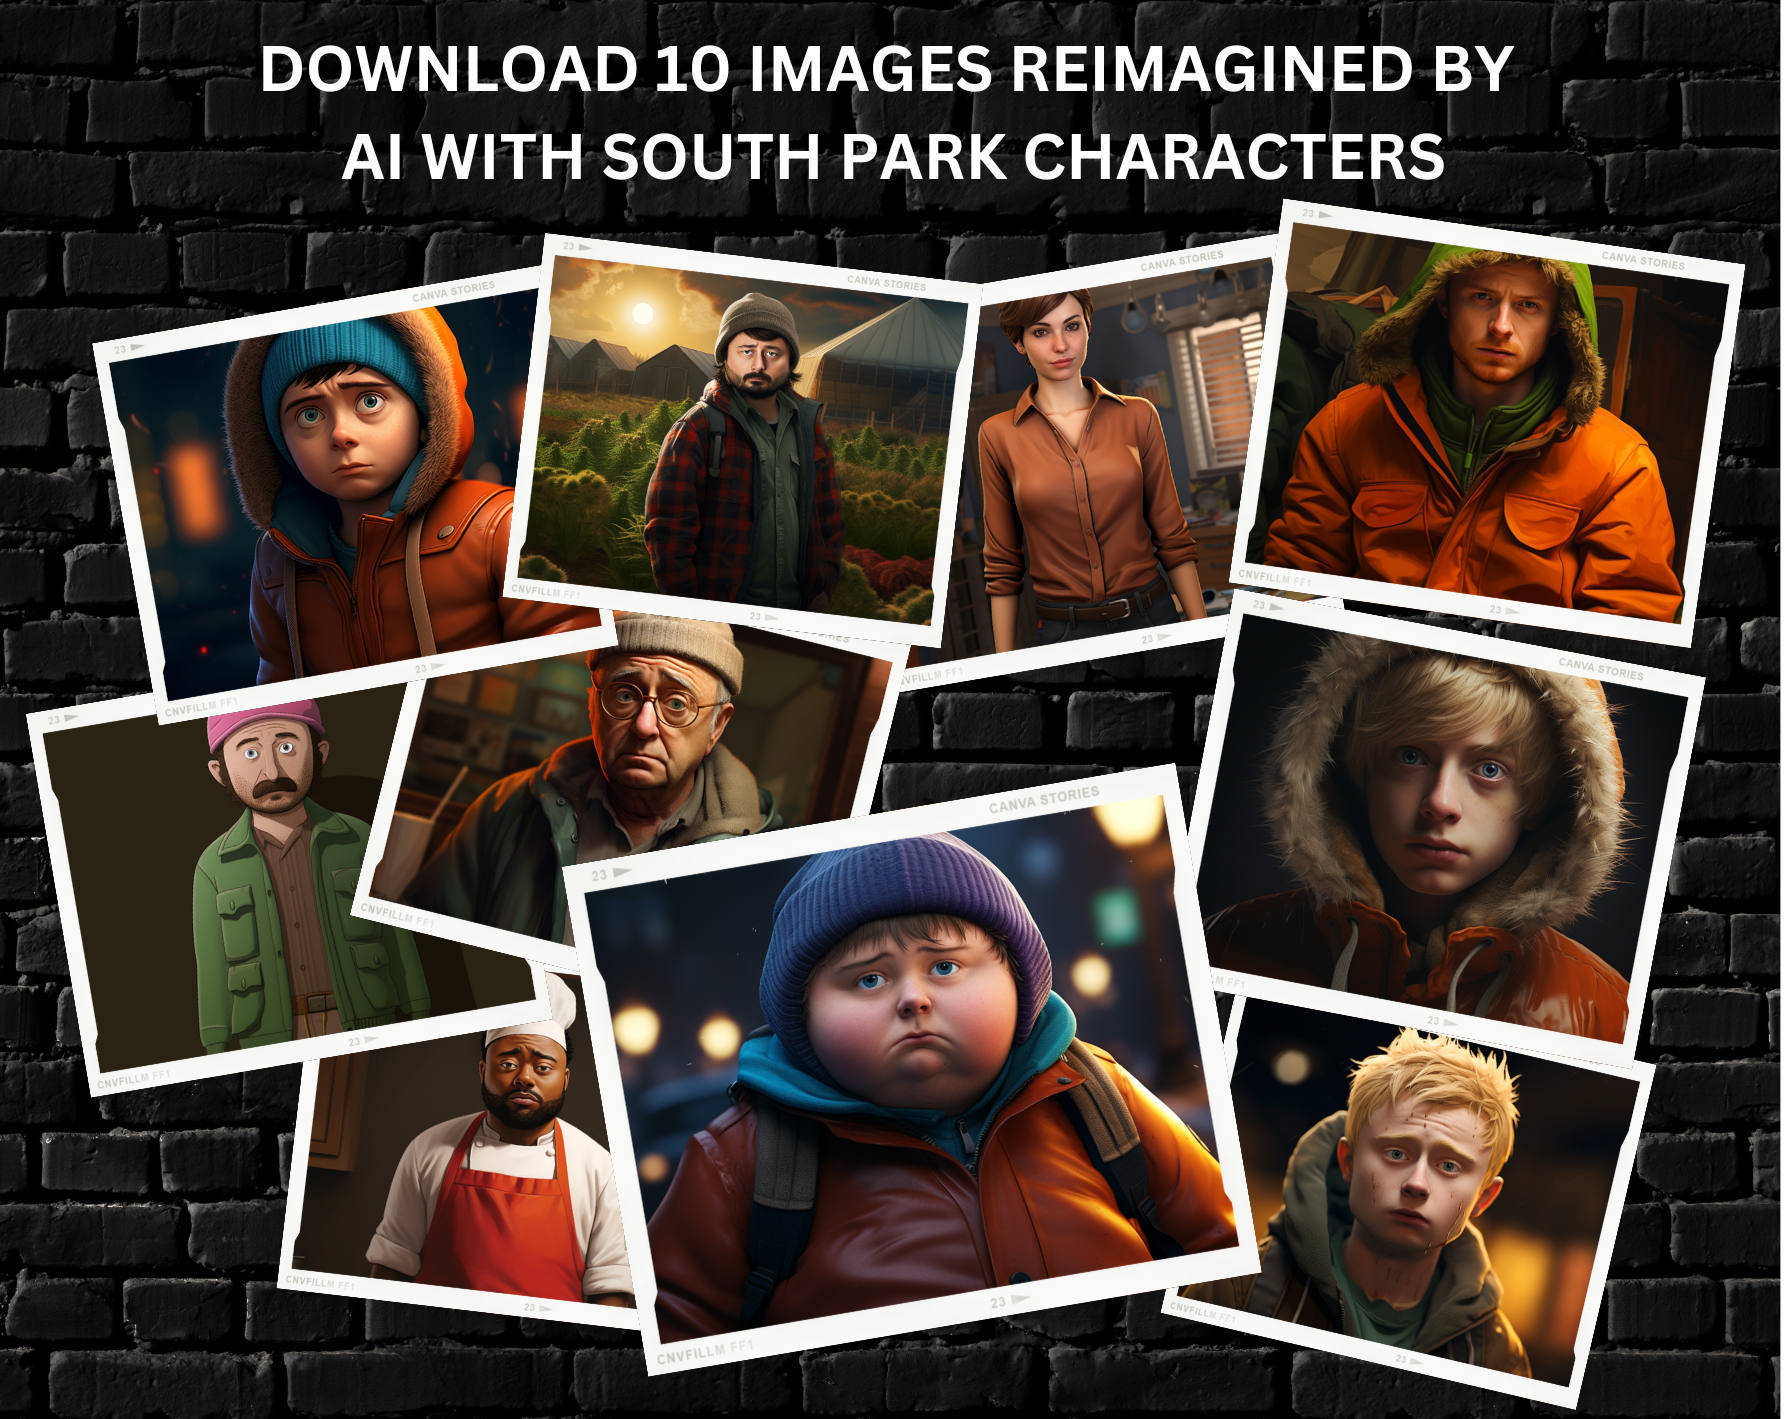 Download 10 Images Reimagined by AI with South Park Characters